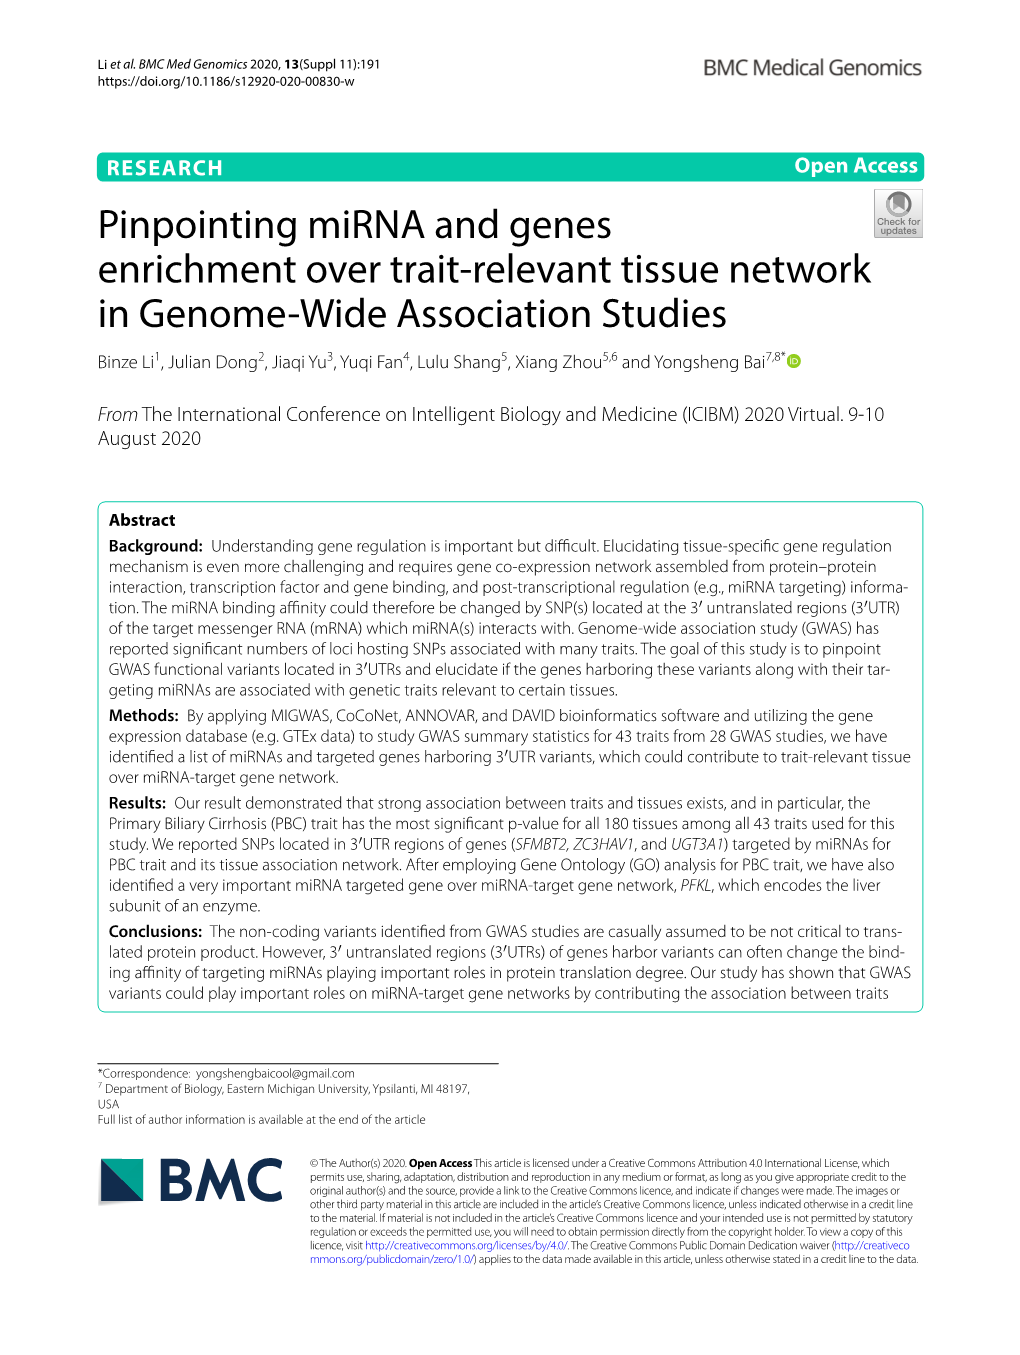 Pinpointing Mirna and Genes Enrichment Over Trait-Relevant Tissue